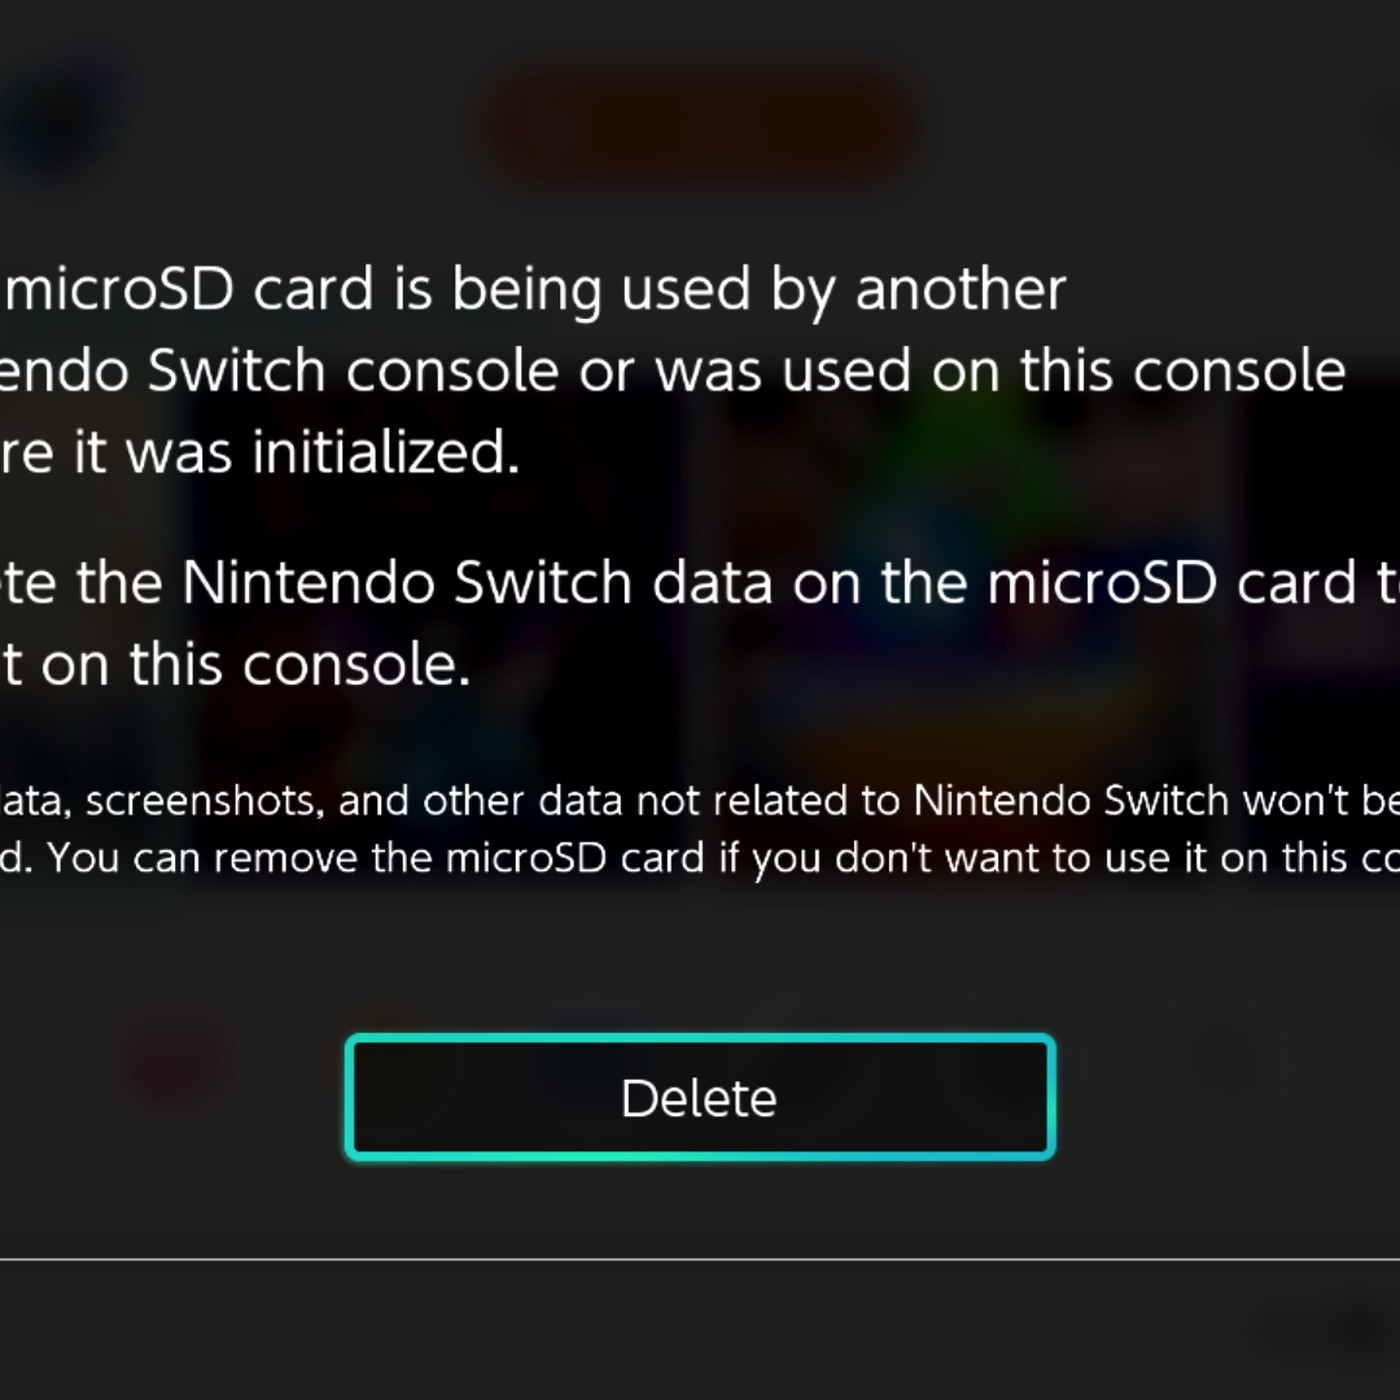 Nintendo Switch consoles can't share microSD cards